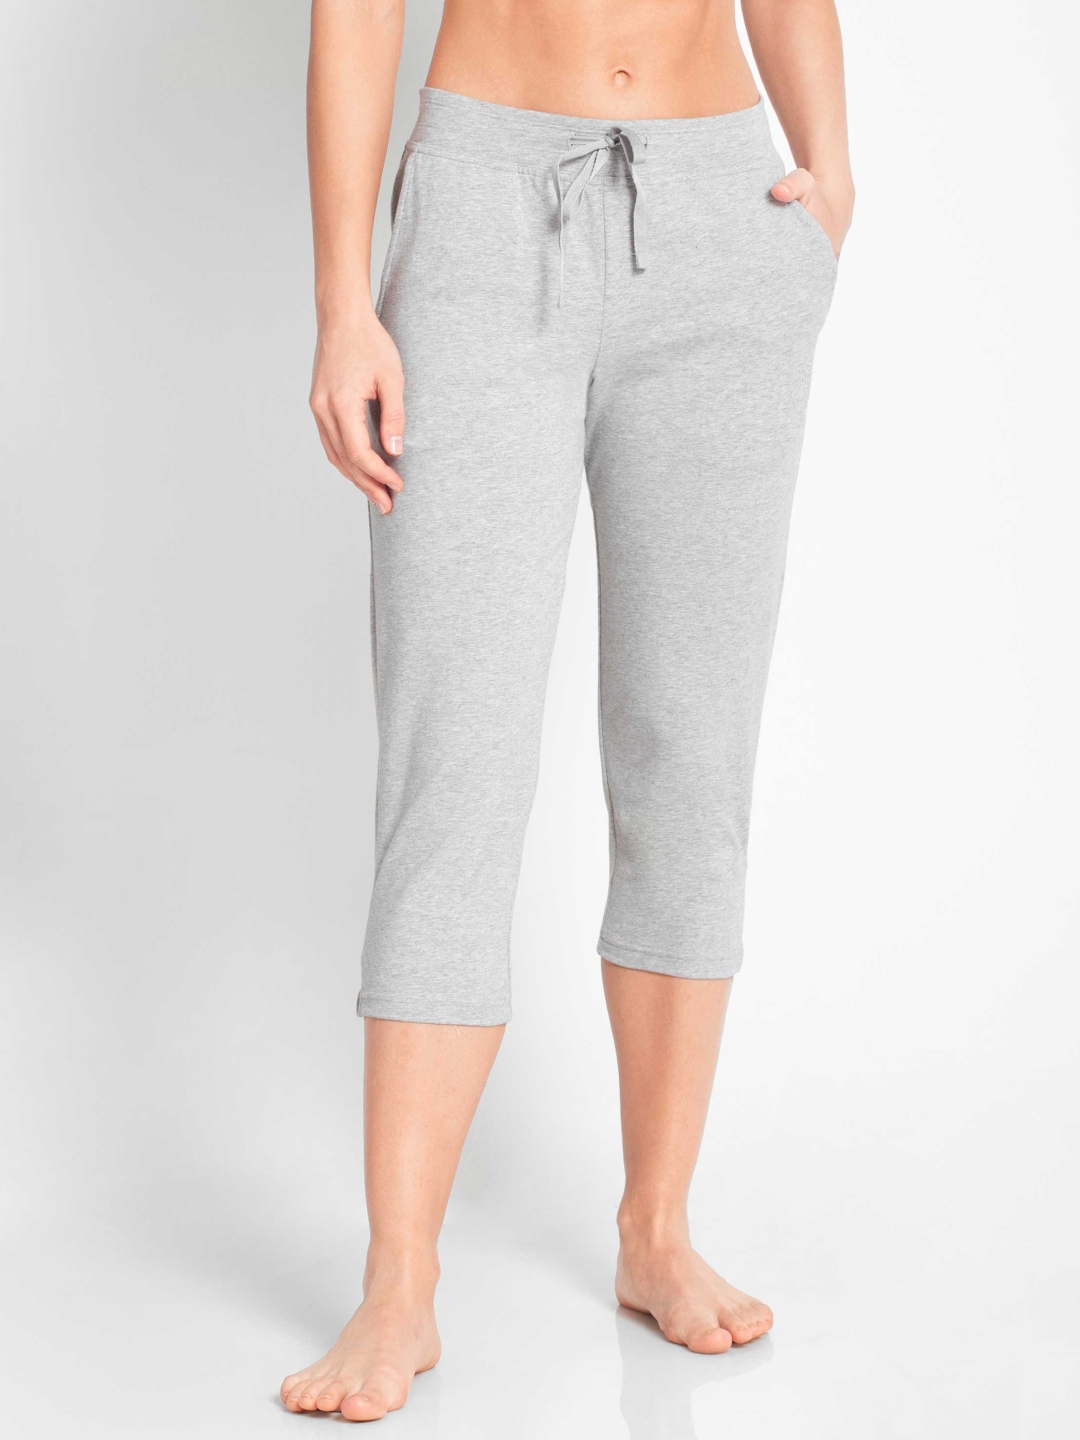 Buy Grey Trousers  Pants for Women by MADAME Online  Ajiocom